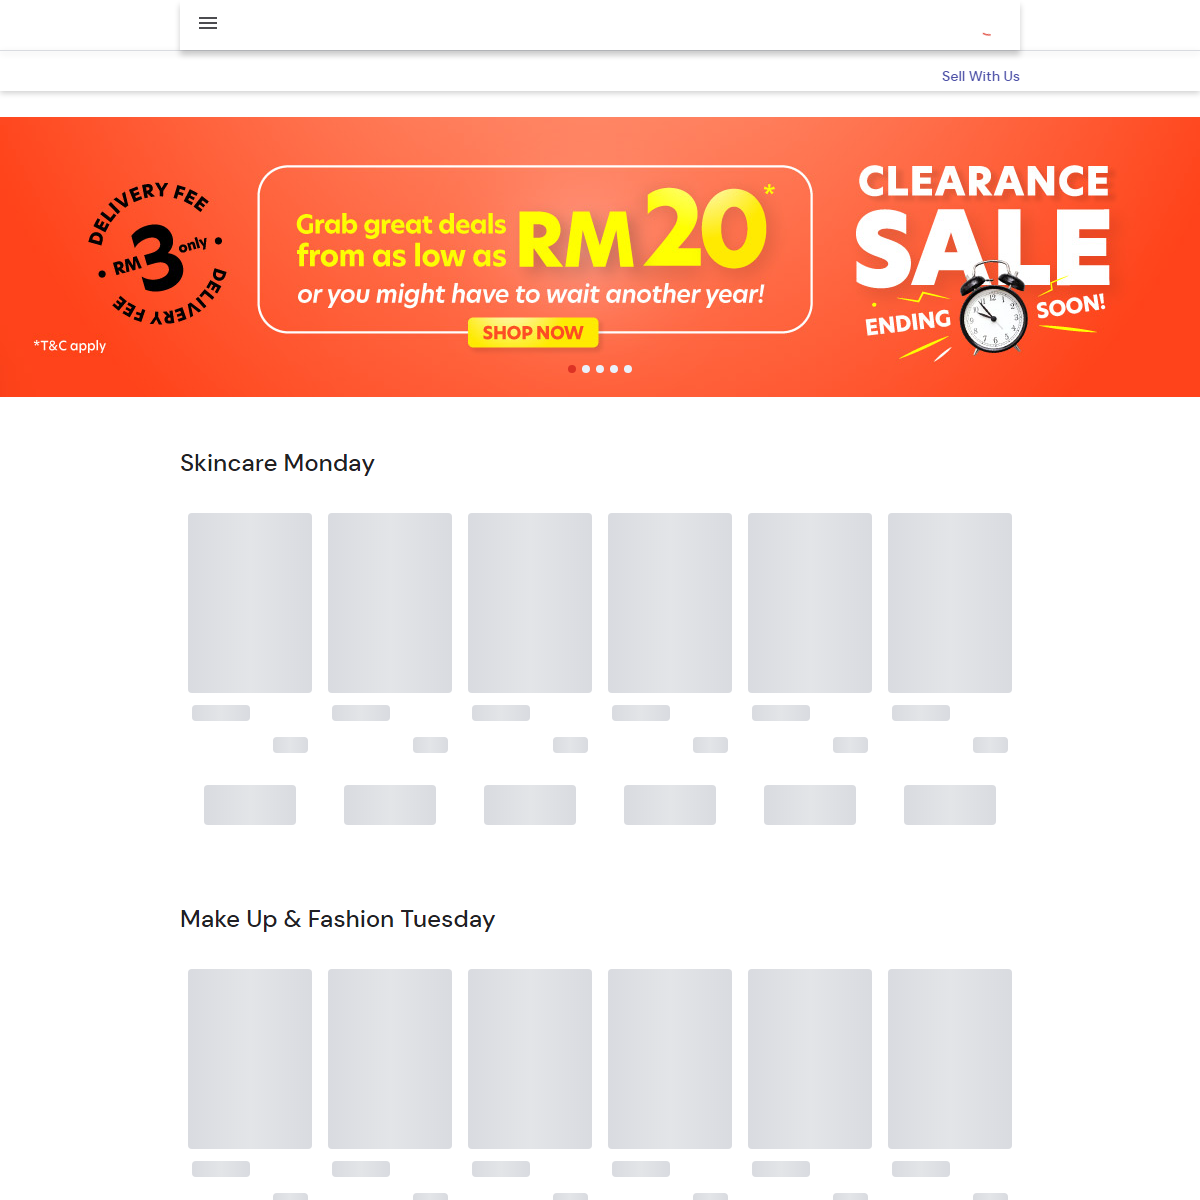 A complete backup of https://www.airasia.com/shop